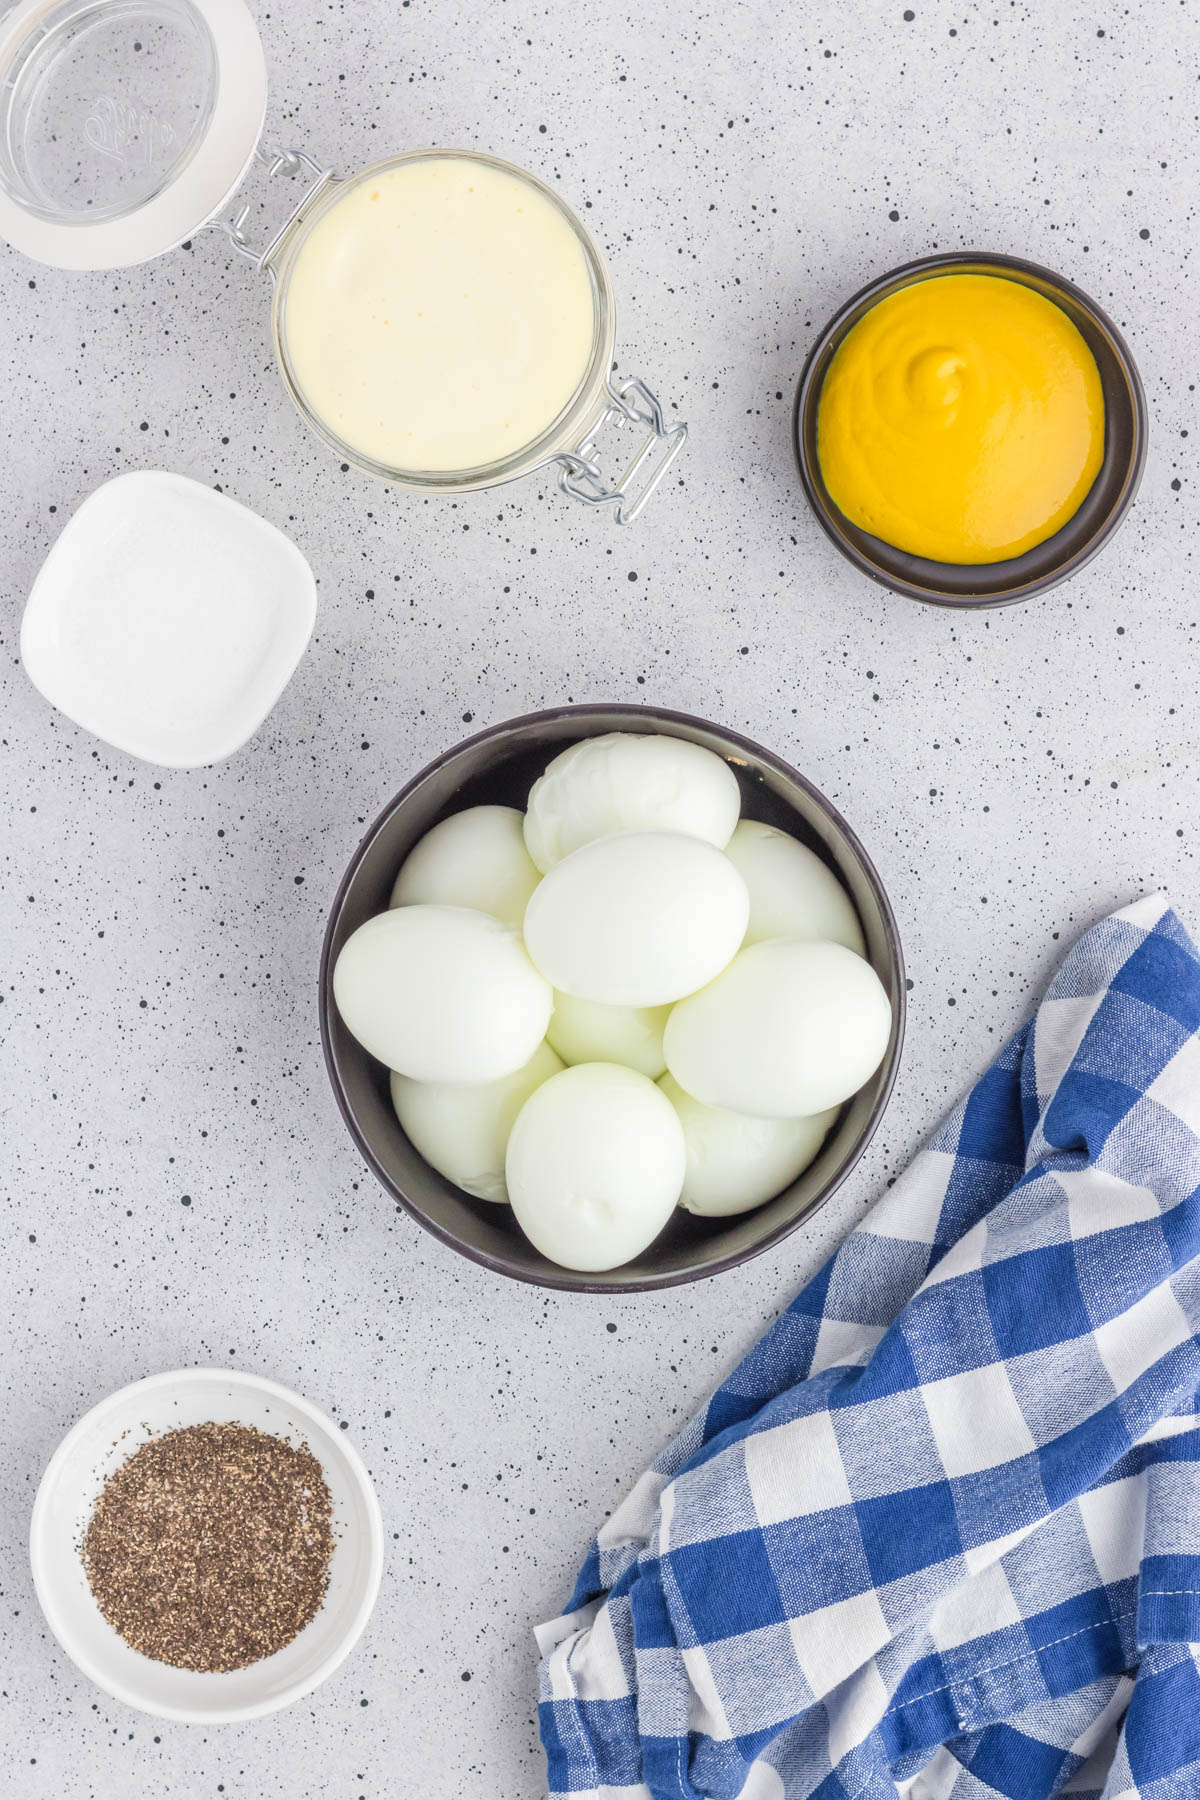 Ingredients for making egg salad including hard-boiled eggs, mayonnaise, mustard, salt, and pepper on a kitchen counter.